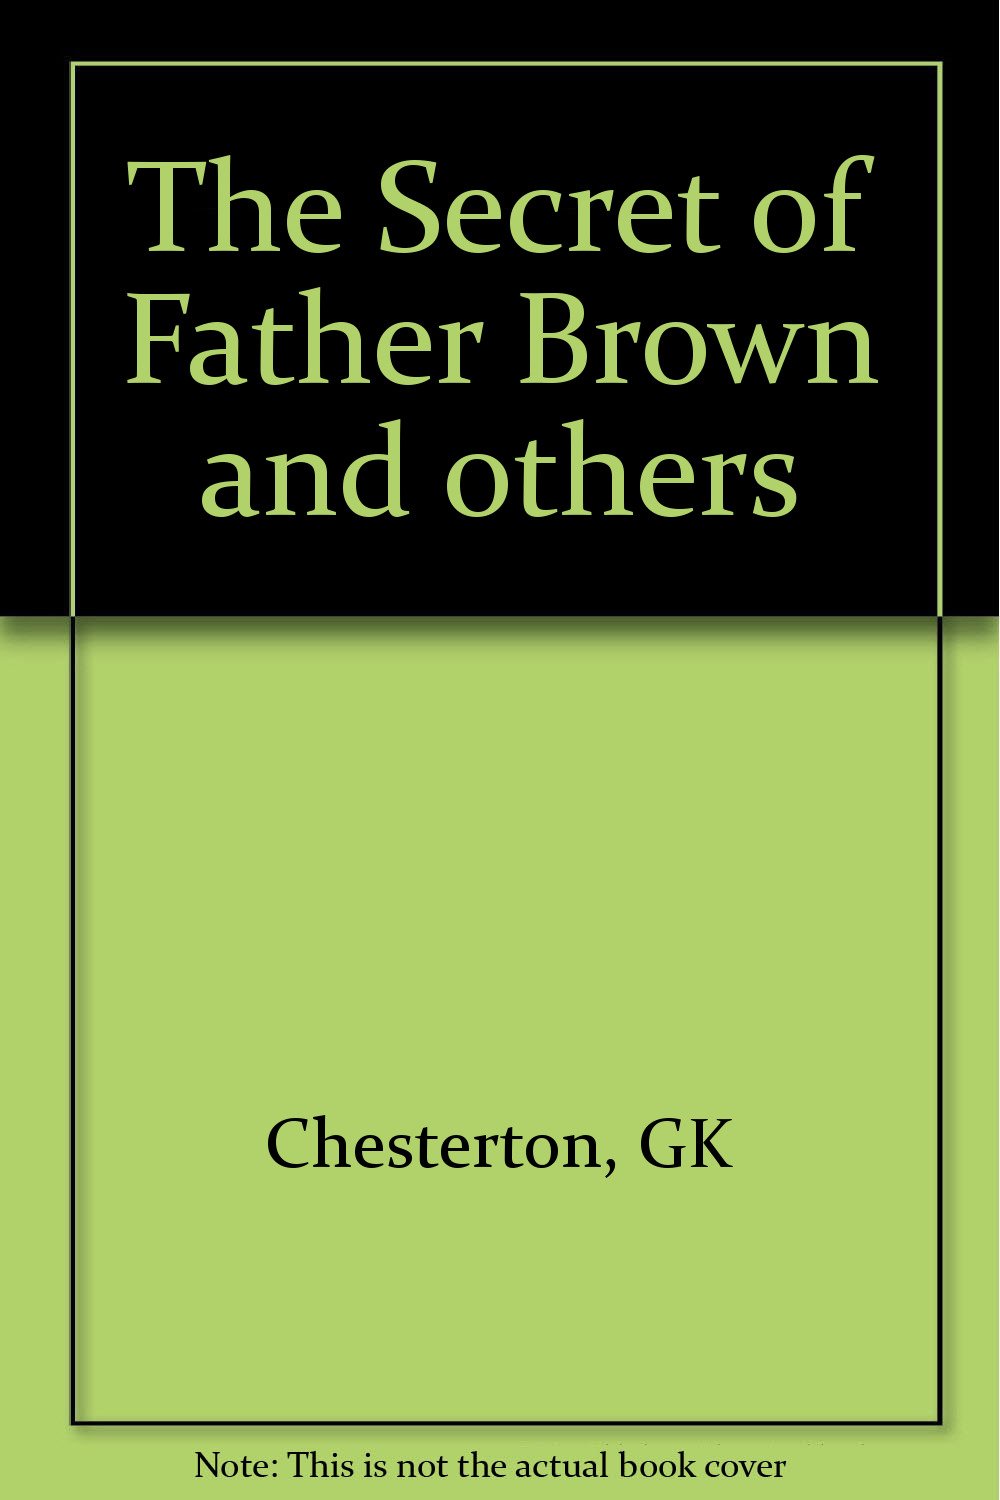 The secret of Father Brown magazine reviews